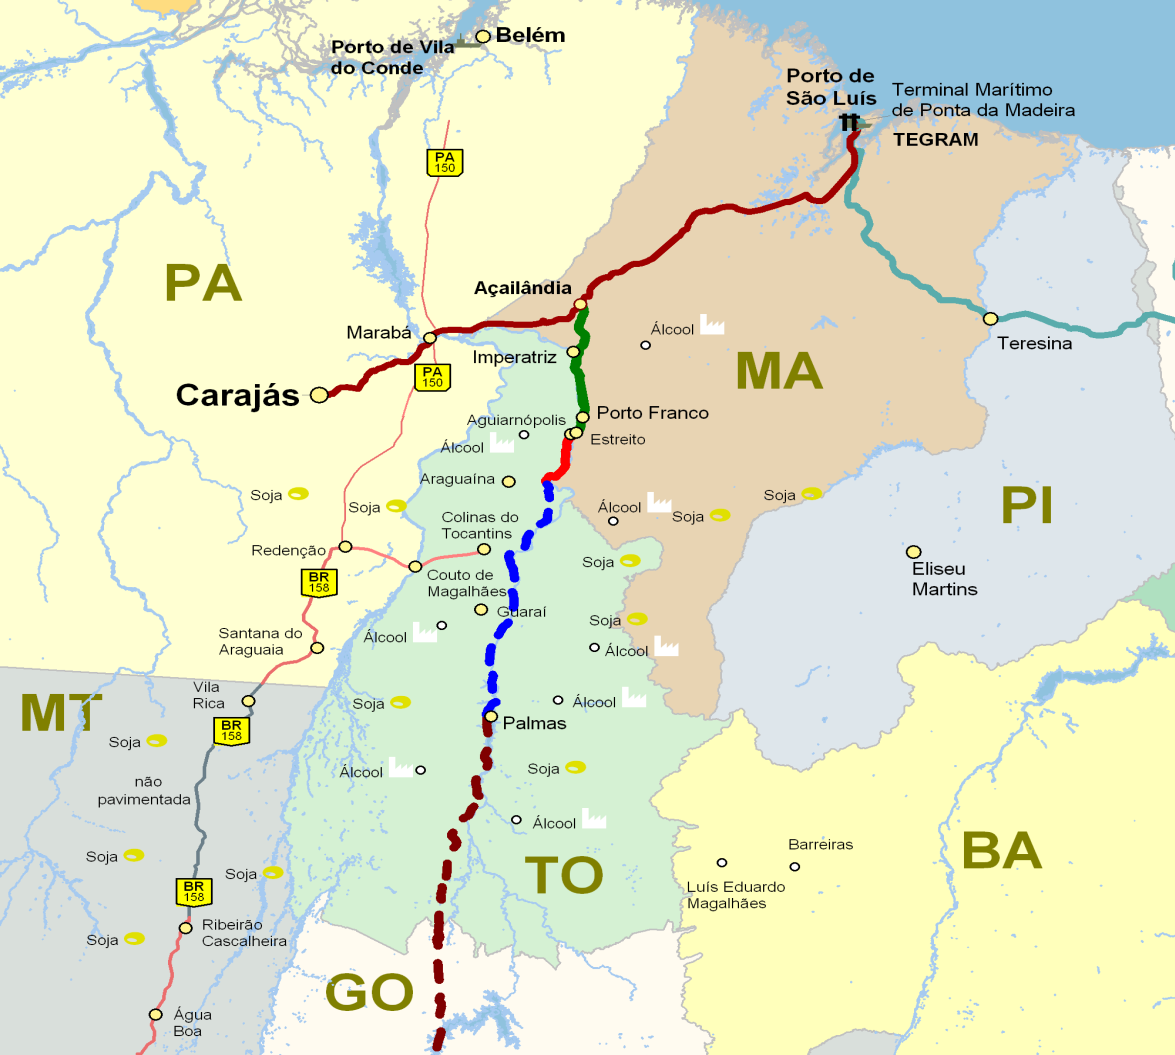 Potential Integrated Logistics RailRoad NORTE SUL New integrated logistic system allowing efficient transport for agribusiness